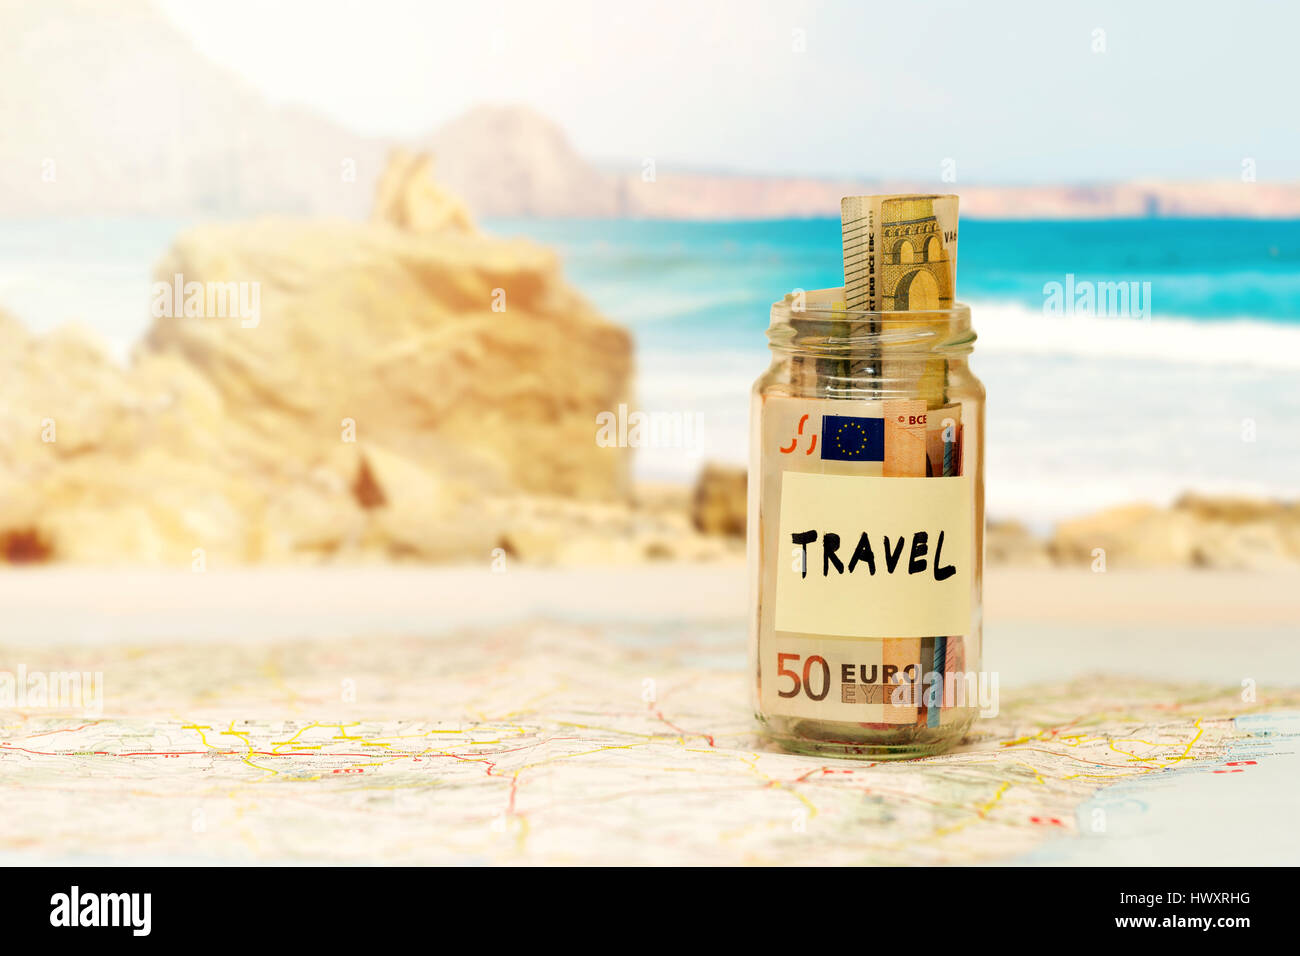 travel budget concept, money savings in a glass jar. copyspace Stock Photo